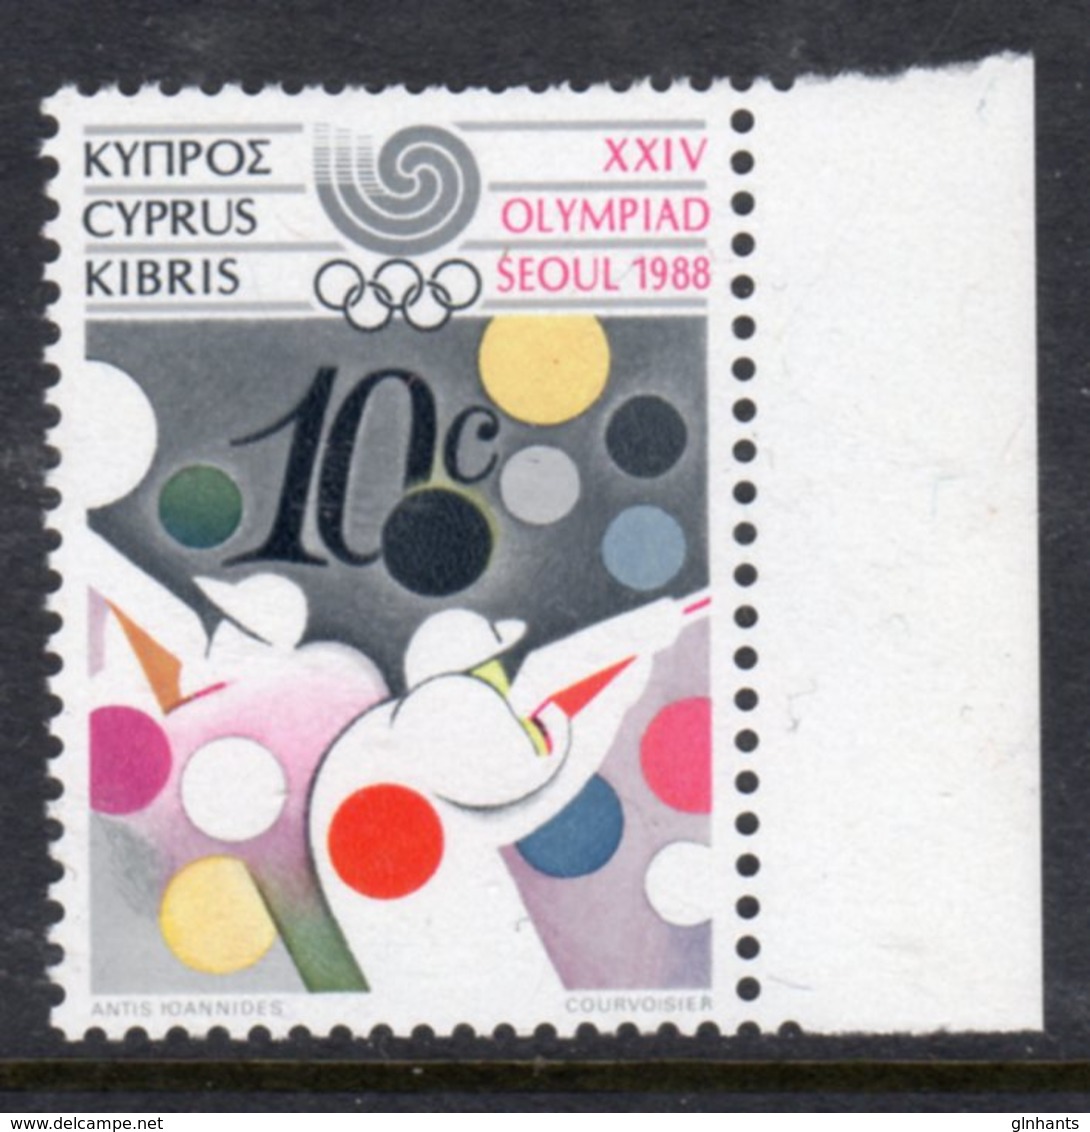 CYPRUS - 1988 OLYMPICS 10c SHOOTING STAMP FINE MNH ** SG 724 - Unused Stamps